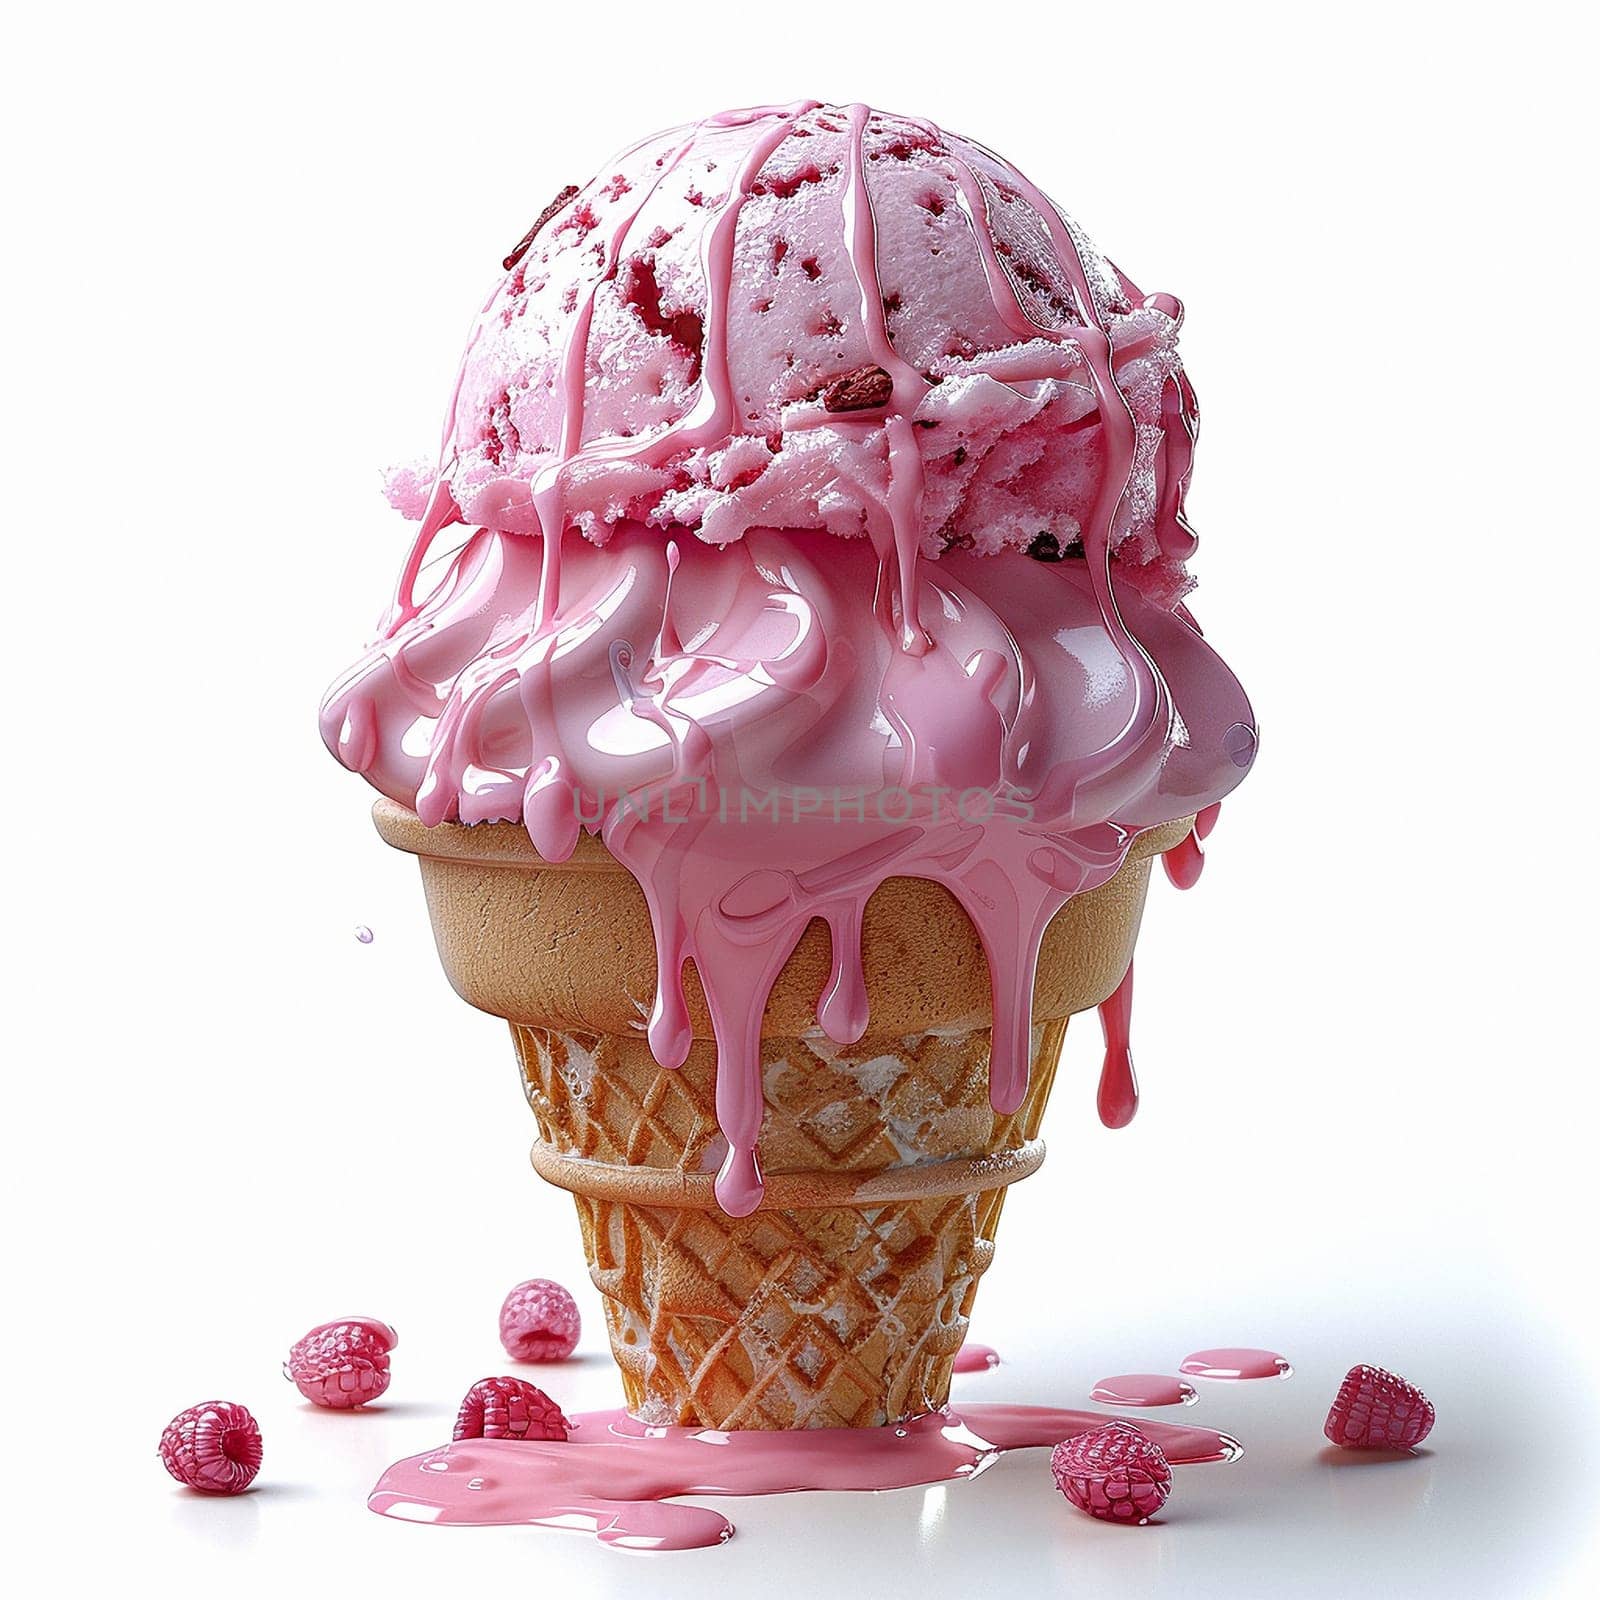 Melted 3d ice cream in a waffle cone. Syrup, crumbs, caramel by NeuroSky